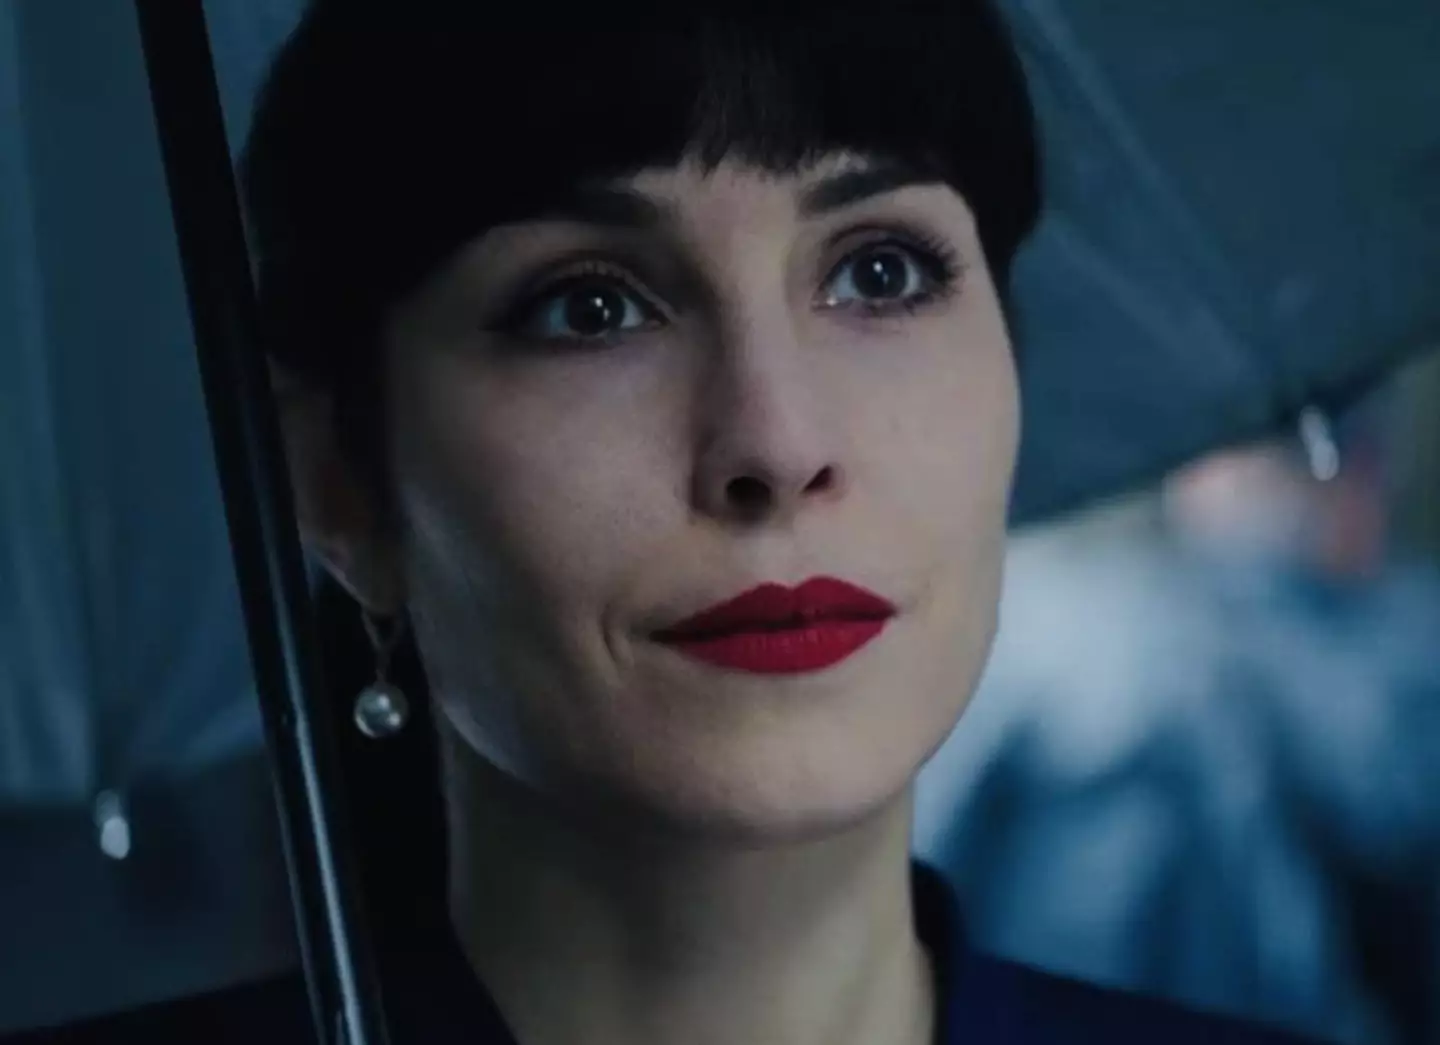 Noomi Rapace described the role as the toughest thing she'd ever done.